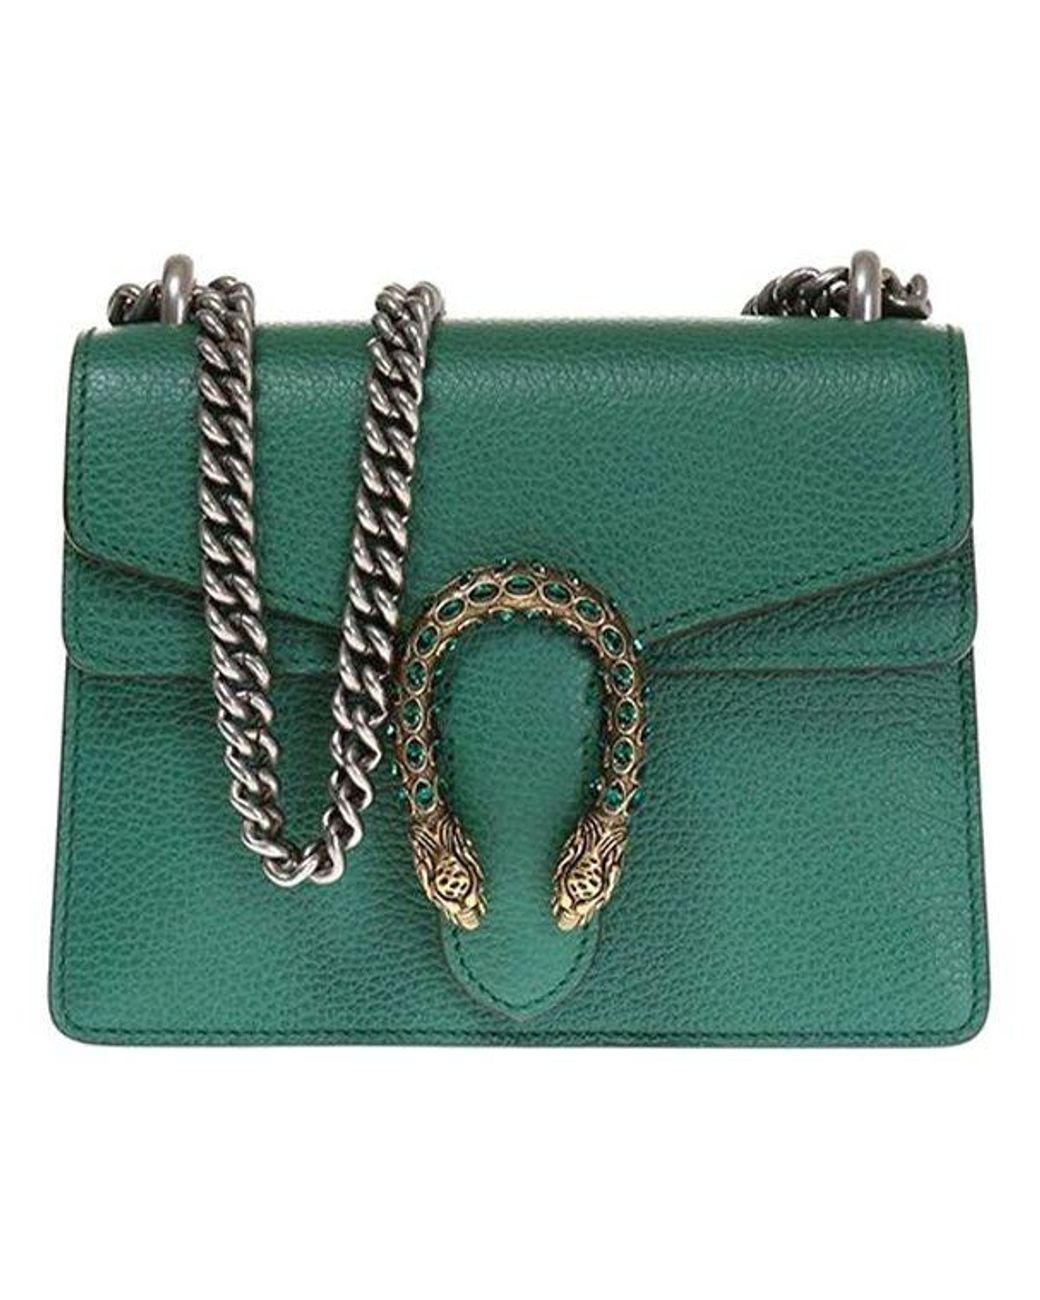 Gucci Dionysus Tiger Head Leather Chain Shoulder Messenger Bag Mini Classic  in Green | Lyst